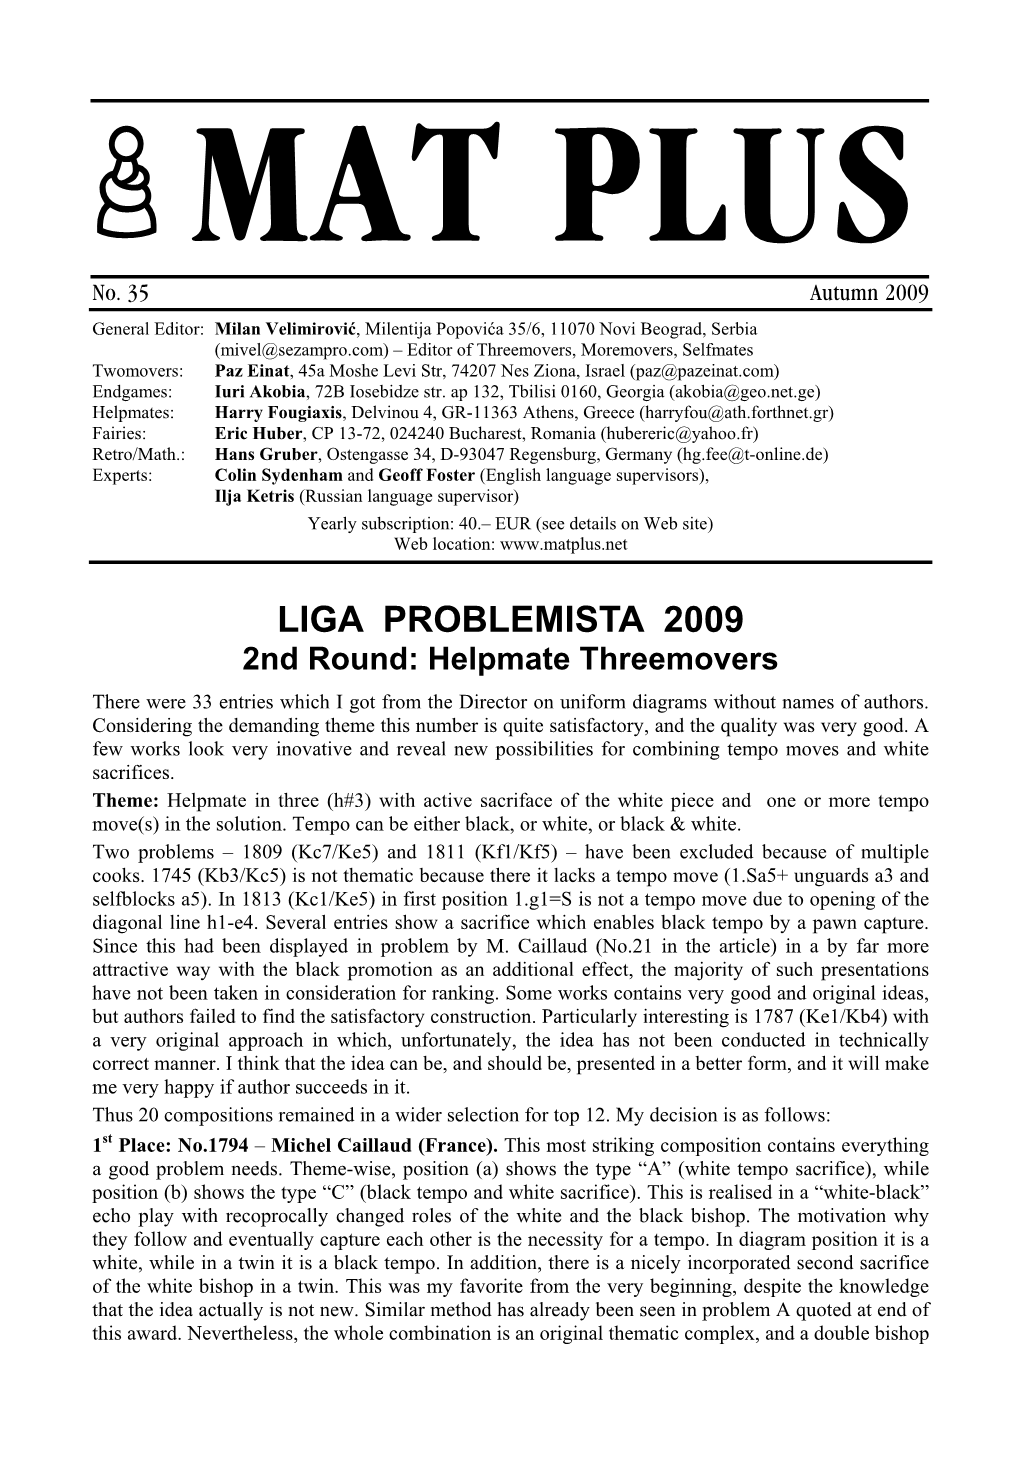 LIGA PROBLEMISTA 2009 2Nd Round: Helpmate Threemovers There Were 33 Entries Which I Got from the Director on Uniform Diagrams Without Names of Authors